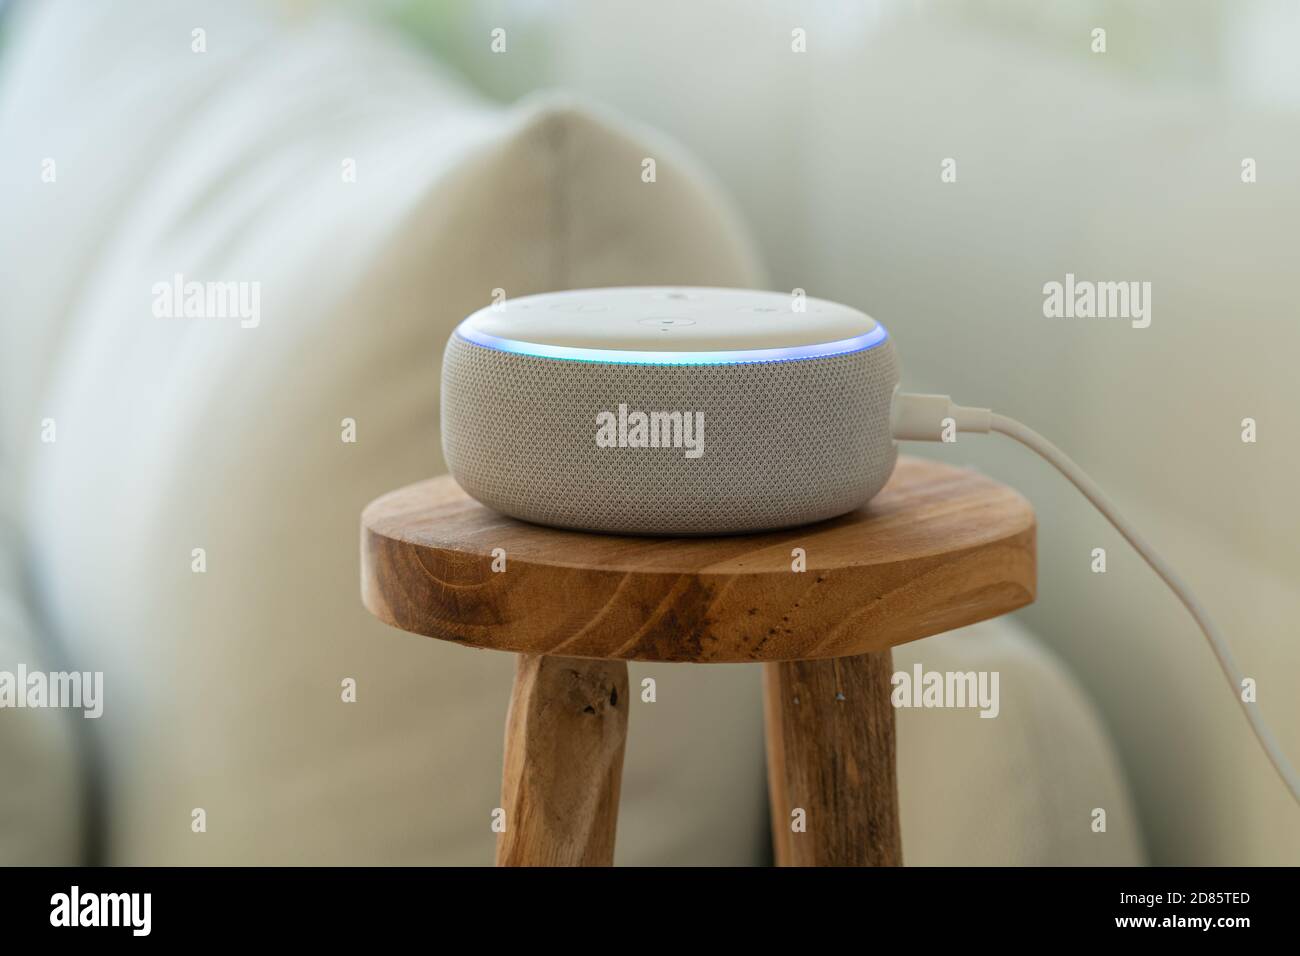 VIENNA,AUSTRIA - October 26 : A white Amazon Alexa Echo on a small wooden  side table with a white sofa in the background Stock Photo - Alamy